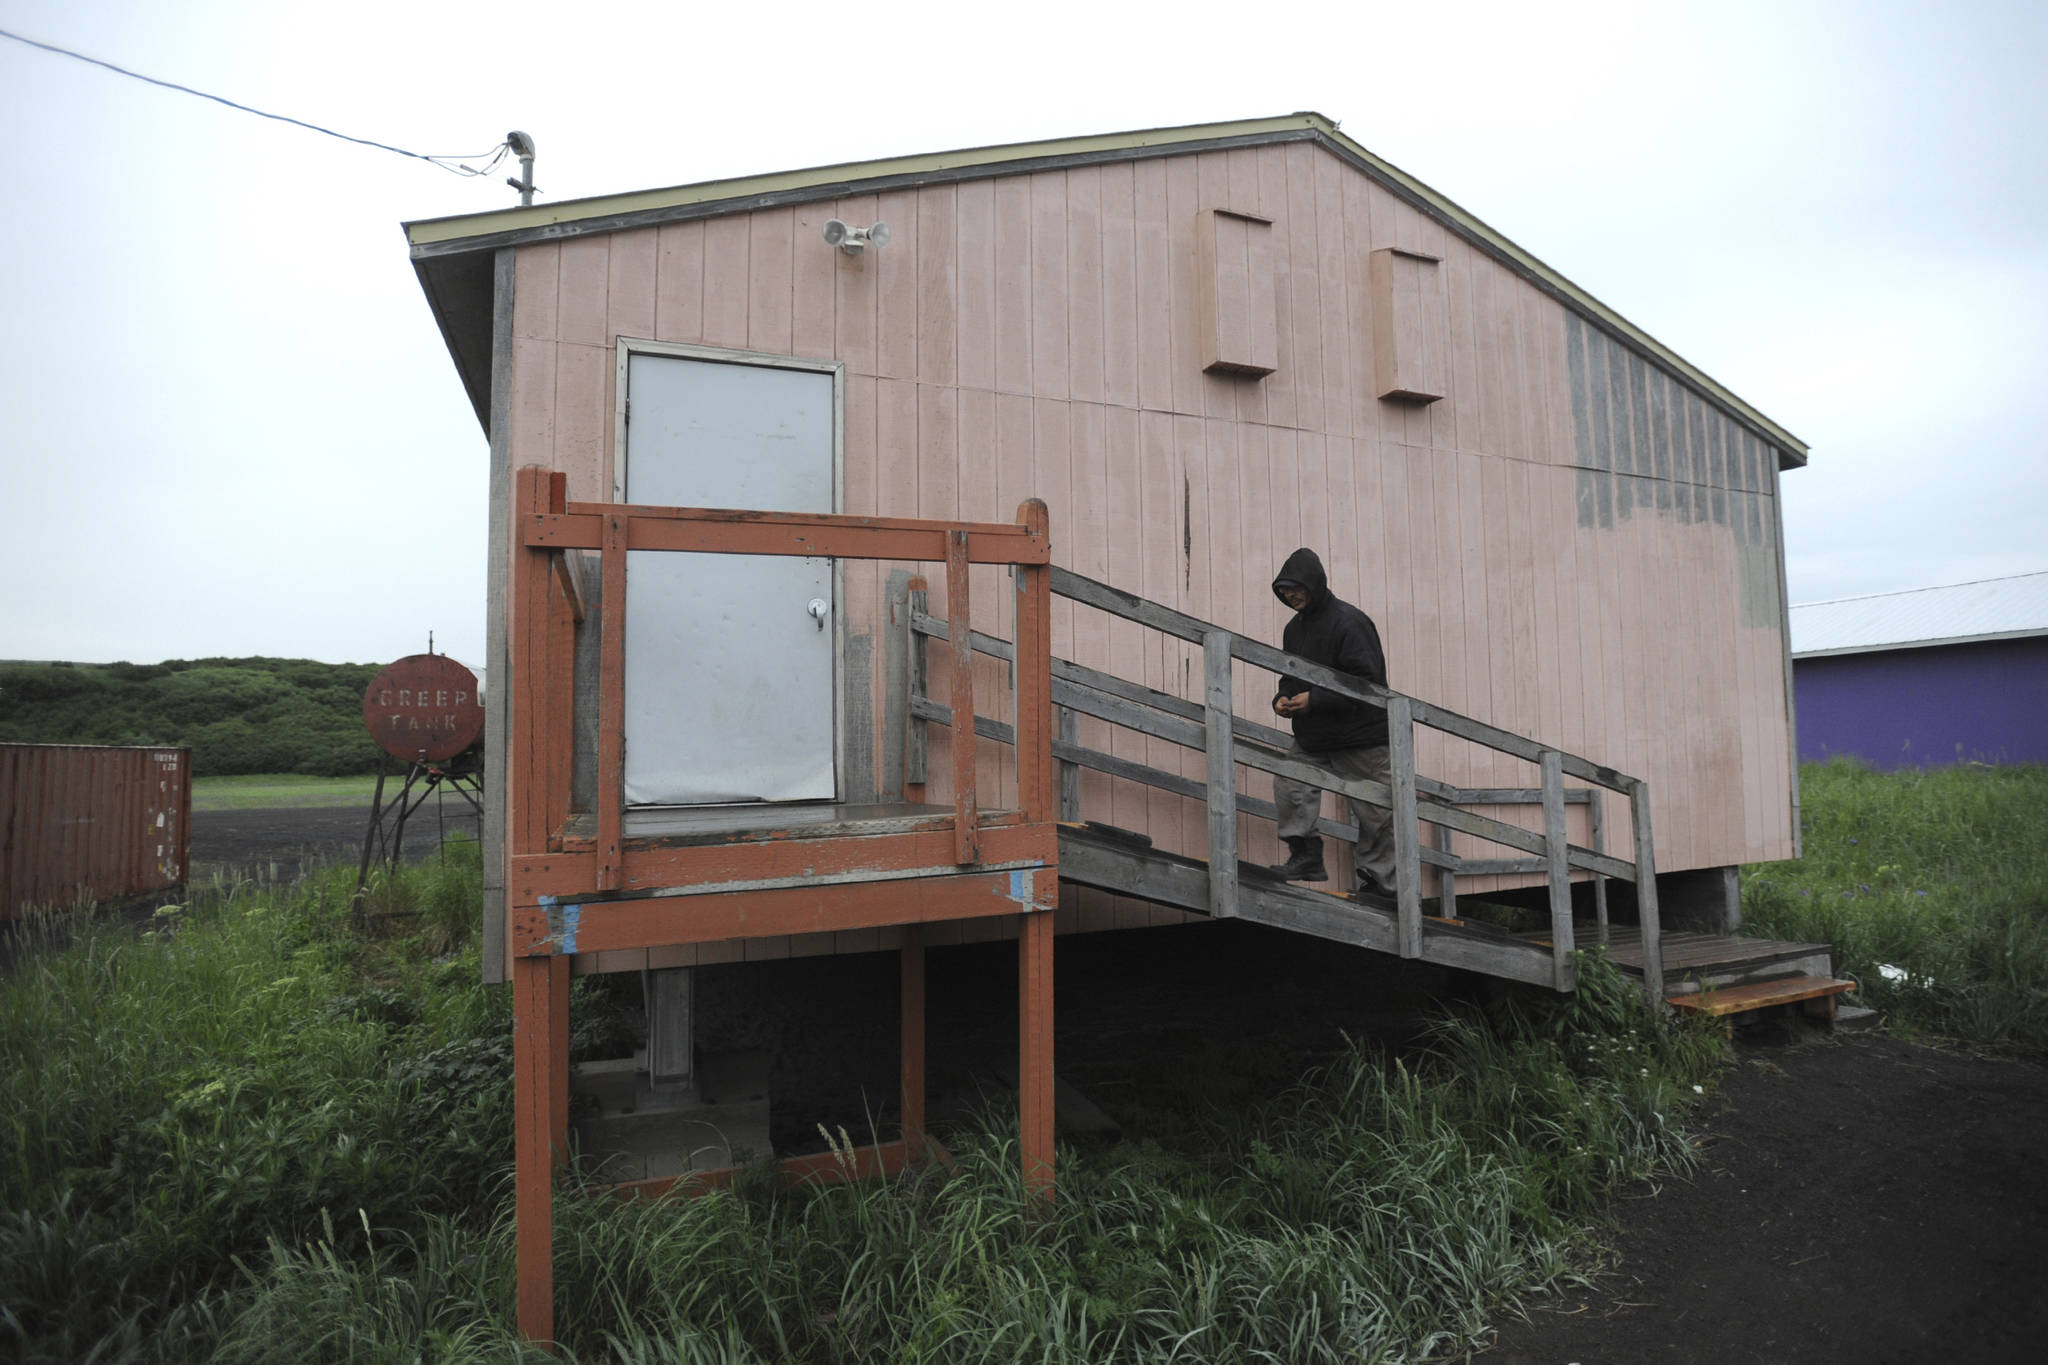 In this Wednesday, June 26, 2019 photo, Stebbins Village Police Officer John Aluska enters the public safety building in the Yup’ik village of Stebbins, Alaska, which houses the police department and three jail cells. Aluska has a criminal record but said it does not interfere with his police work. At least 14 cities in Alaska have employed police officers whose criminal records should have prevented them from being hired under state law, the Anchorage Daily News and ProPublica reported Saturday, July 20. (Bill Roth/Anchorage Daily News via AP)